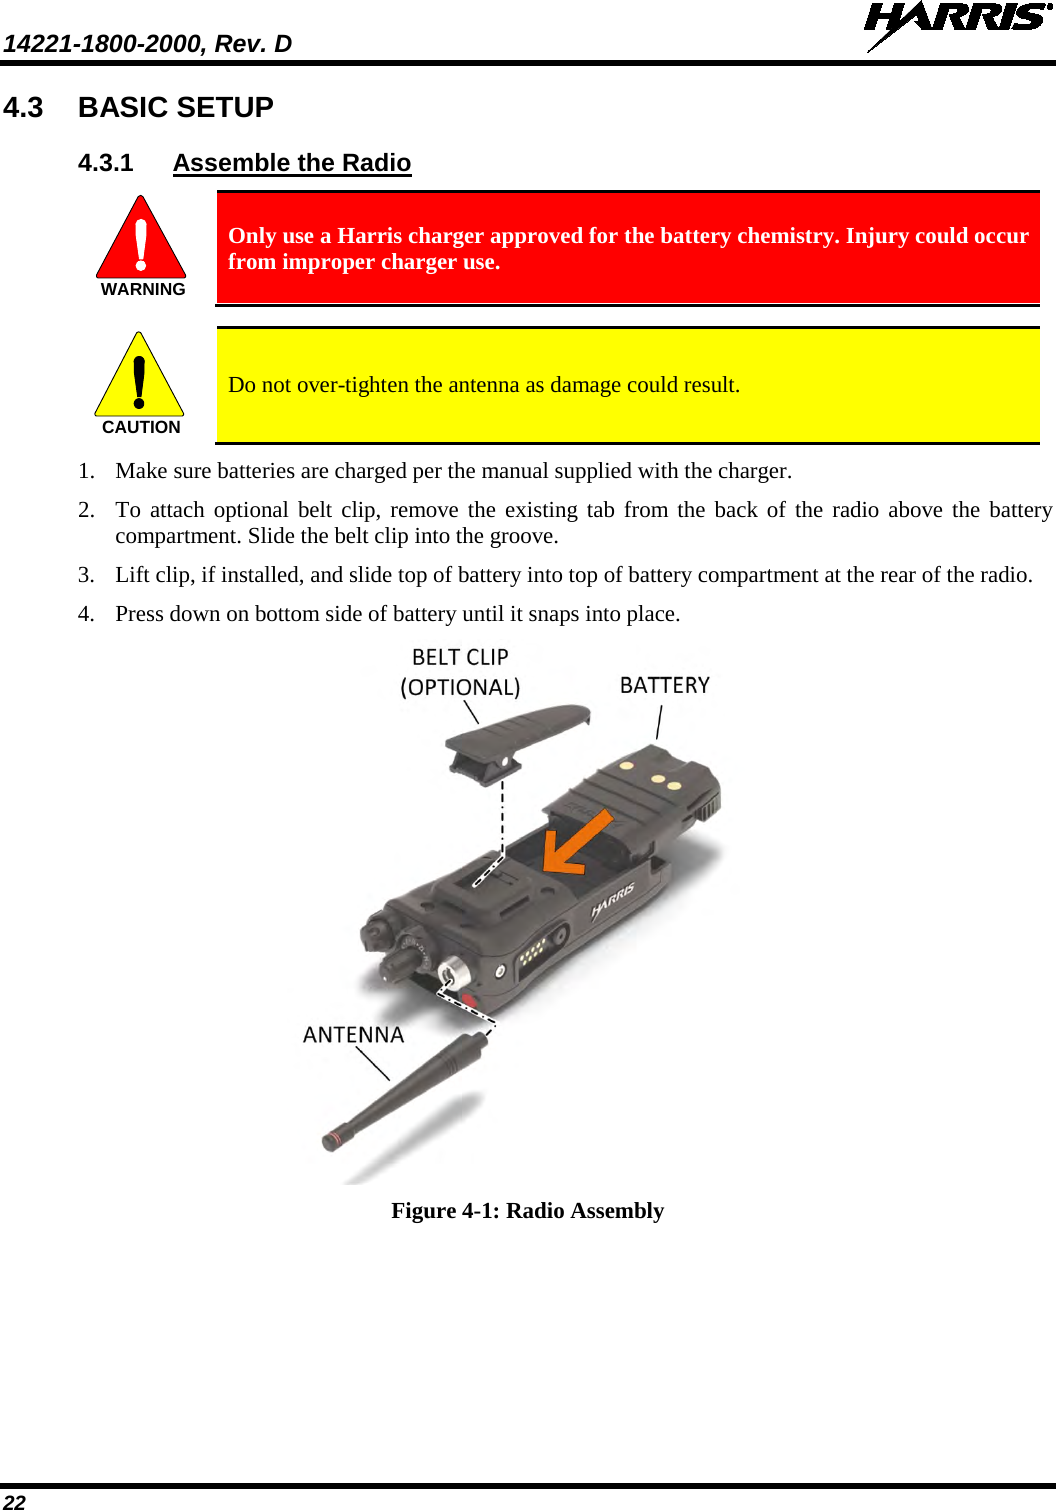 14221-1800-2000, Rev. D   22 4.3 BASIC SETUP 4.3.1 Assemble the Radio  Only use a Harris charger approved for the battery chemistry. Injury could occur from improper charger use.    Do not over-tighten the antenna as damage could result. 1. Make sure batteries are charged per the manual supplied with the charger. 2. To attach optional belt clip, remove the existing tab from the back of the radio above the battery compartment. Slide the belt clip into the groove. 3. Lift clip, if installed, and slide top of battery into top of battery compartment at the rear of the radio. 4. Press down on bottom side of battery until it snaps into place.   Figure 4-1: Radio Assembly WARNINGCAUTION